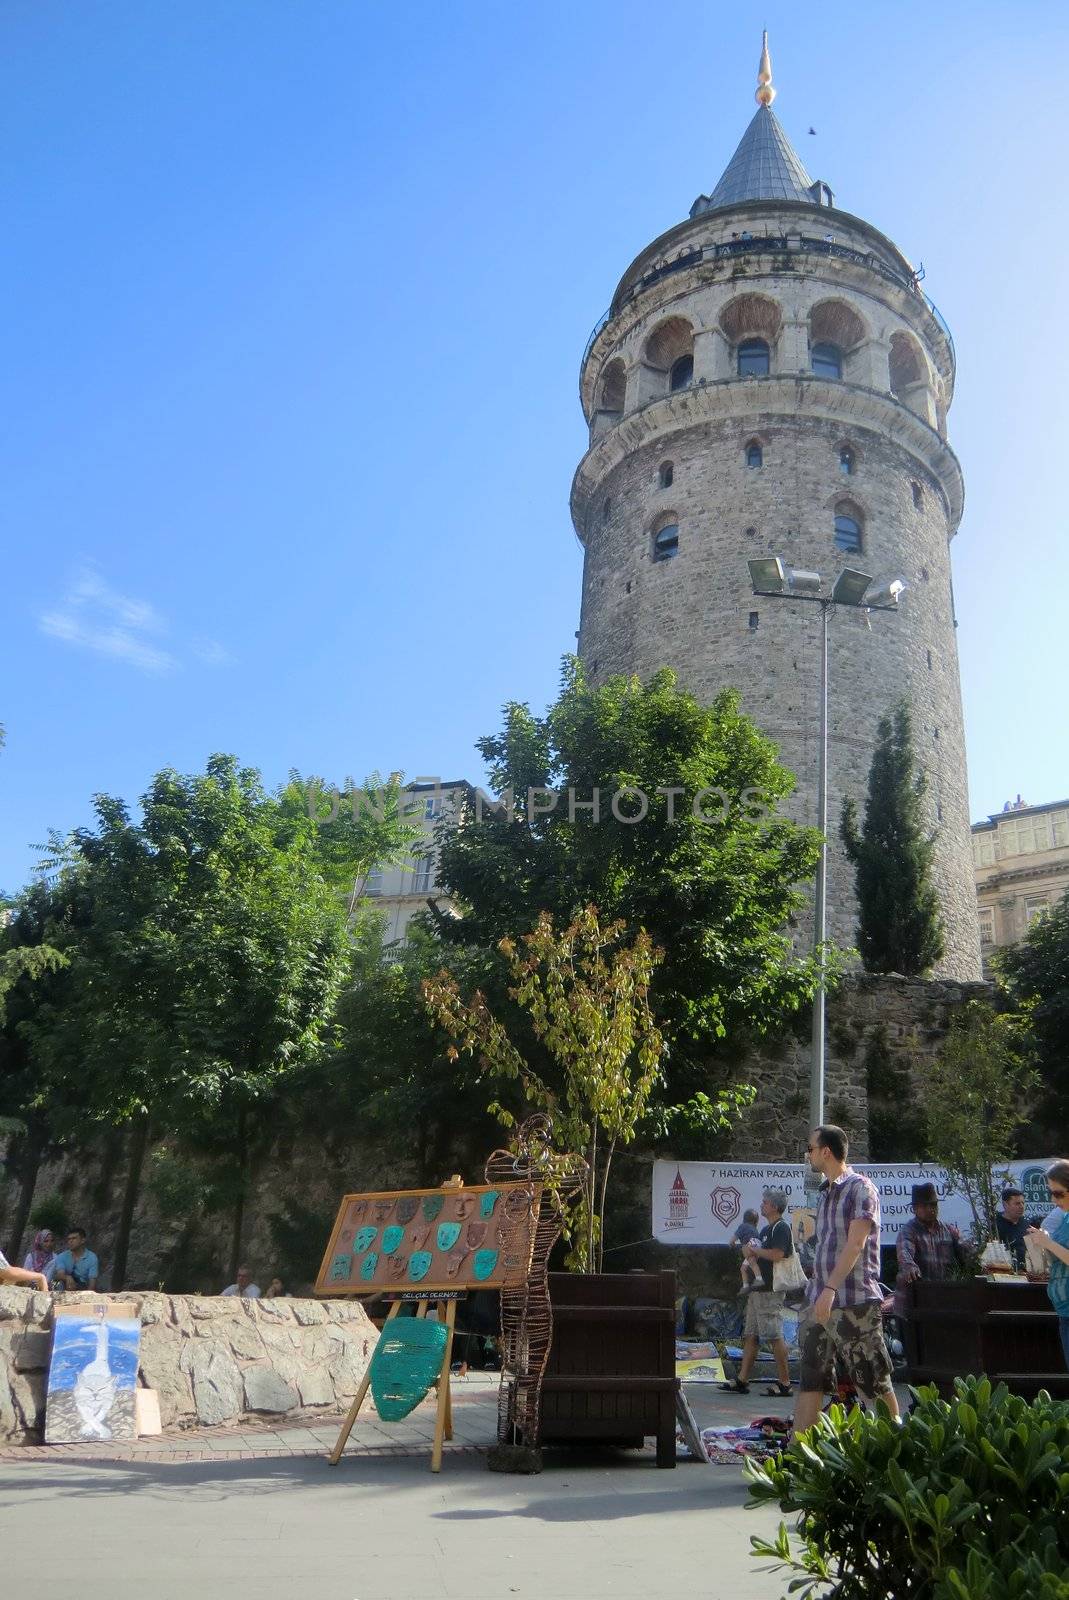 a historic tower which is a place of interest in Turkey. Galata-tower against blue sky